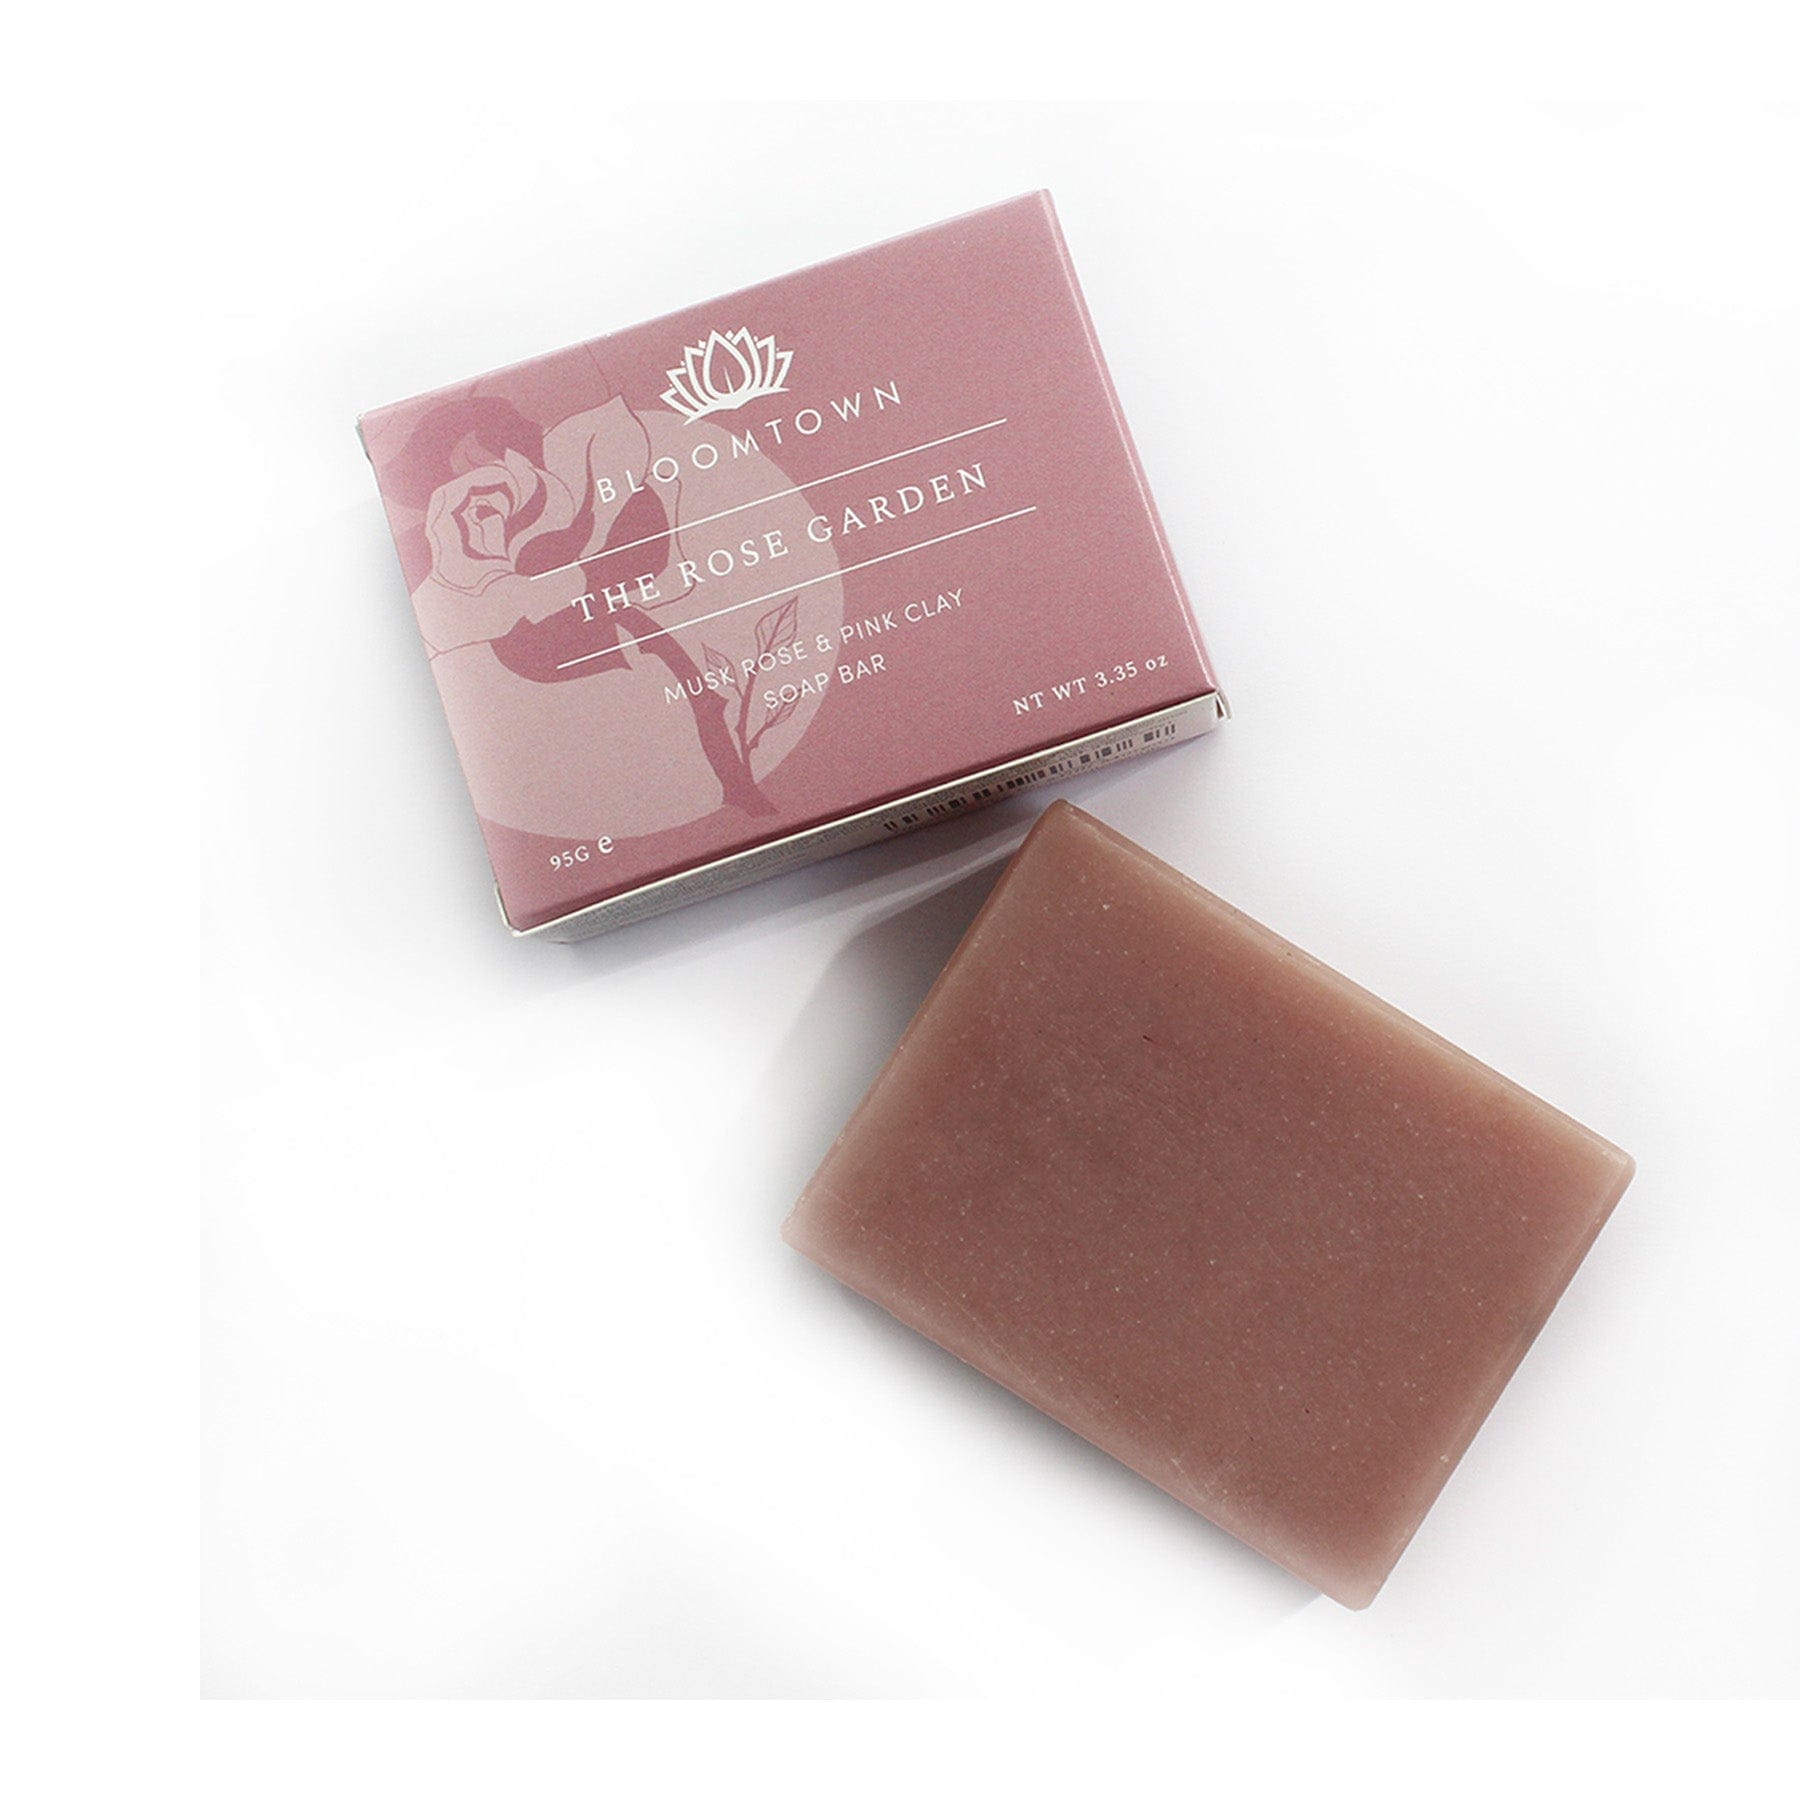 Bloomtown The Rose Garden musk rose and pink clay soap bar with packaging on white background.